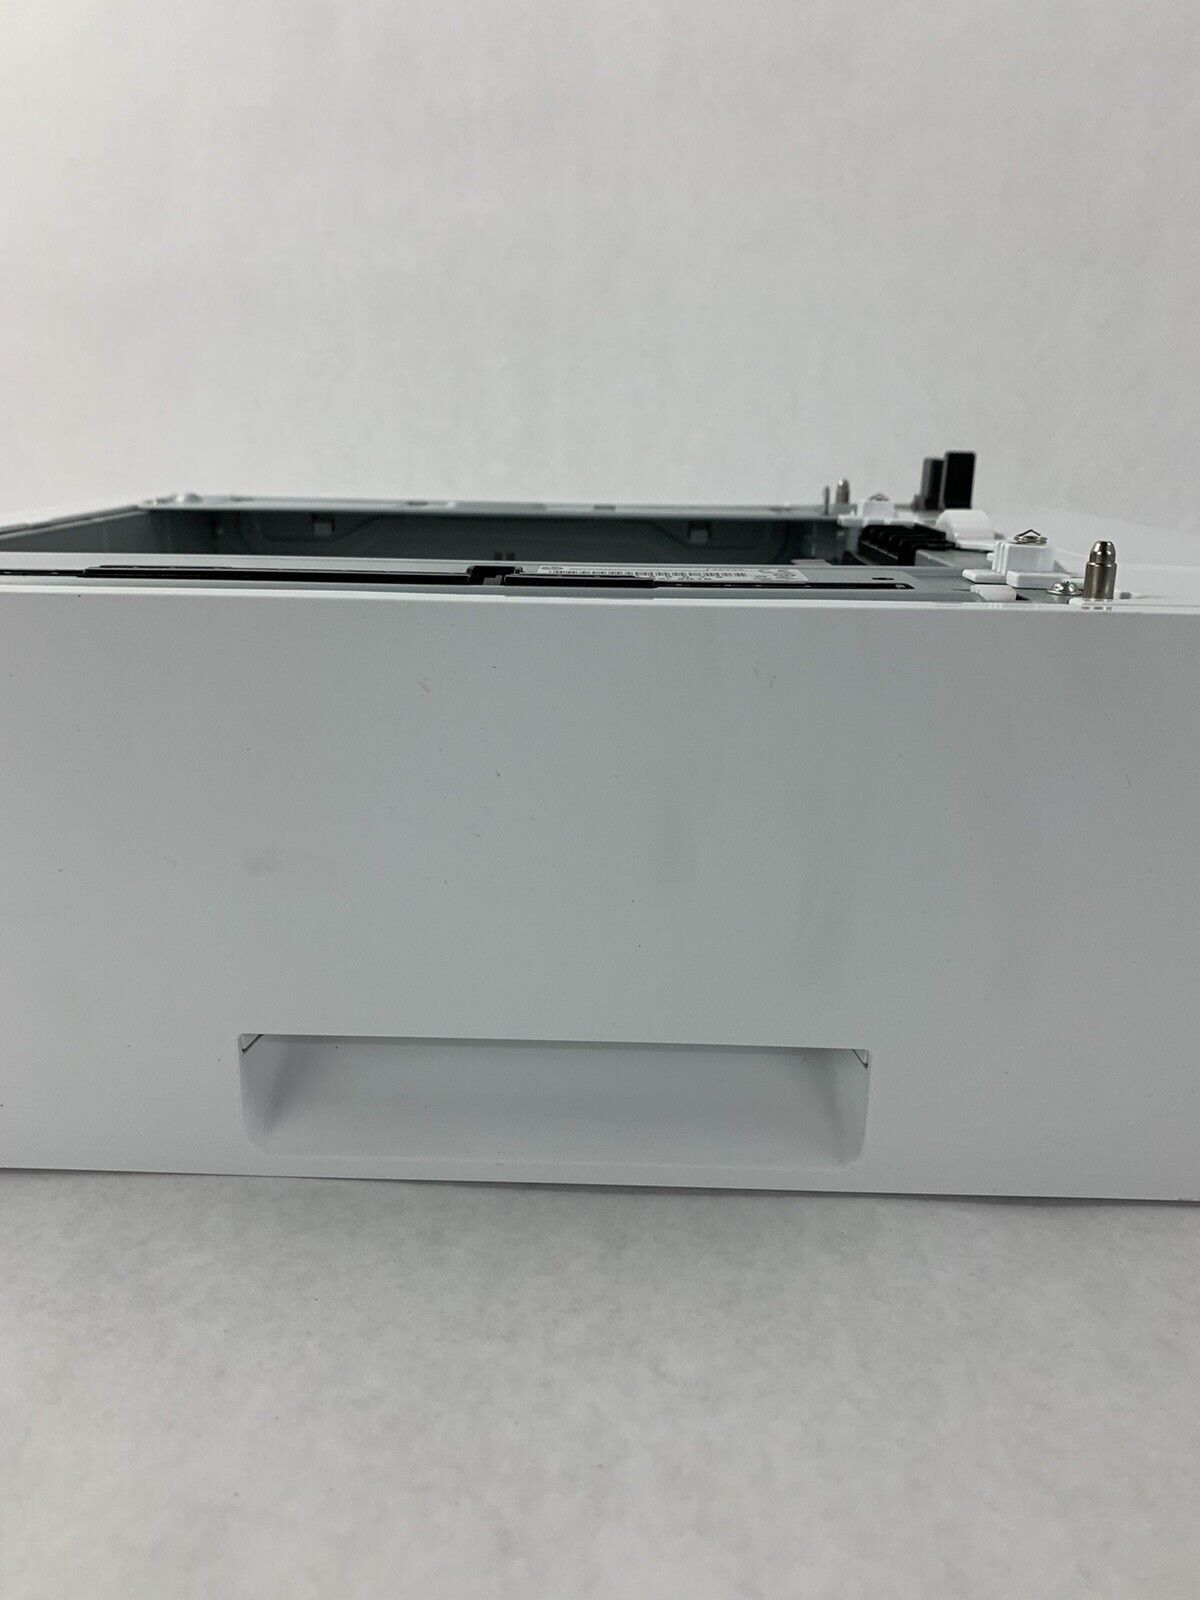 OEM HP LaserJet M506 500 Sheet Paper Tray F2A72A Trays 3 and 4